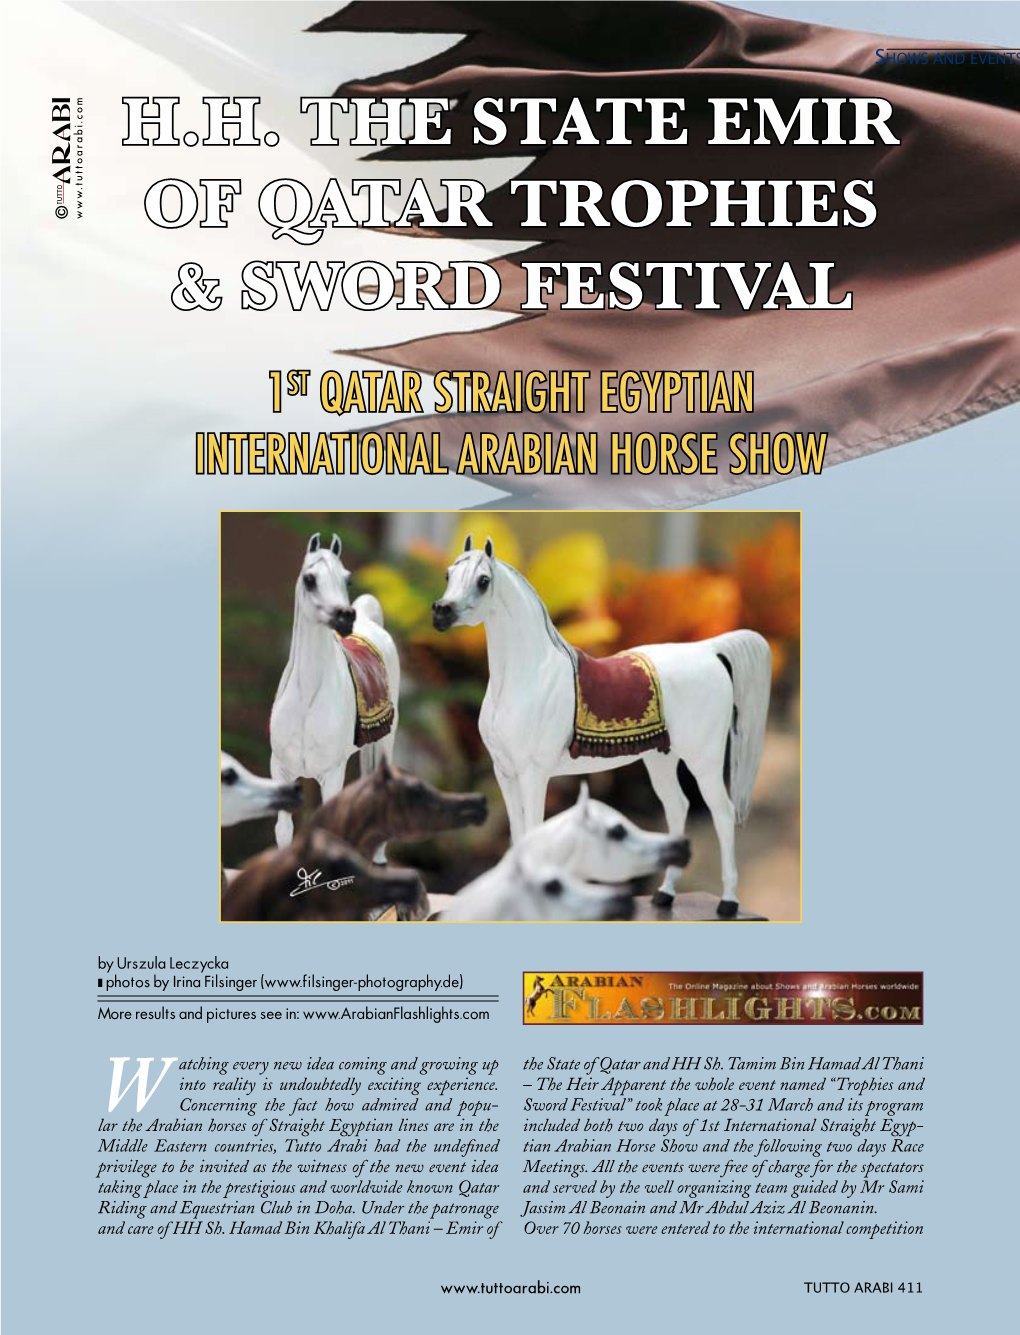 H.H. the State Emir of Qatar Trophies & Sword Festival